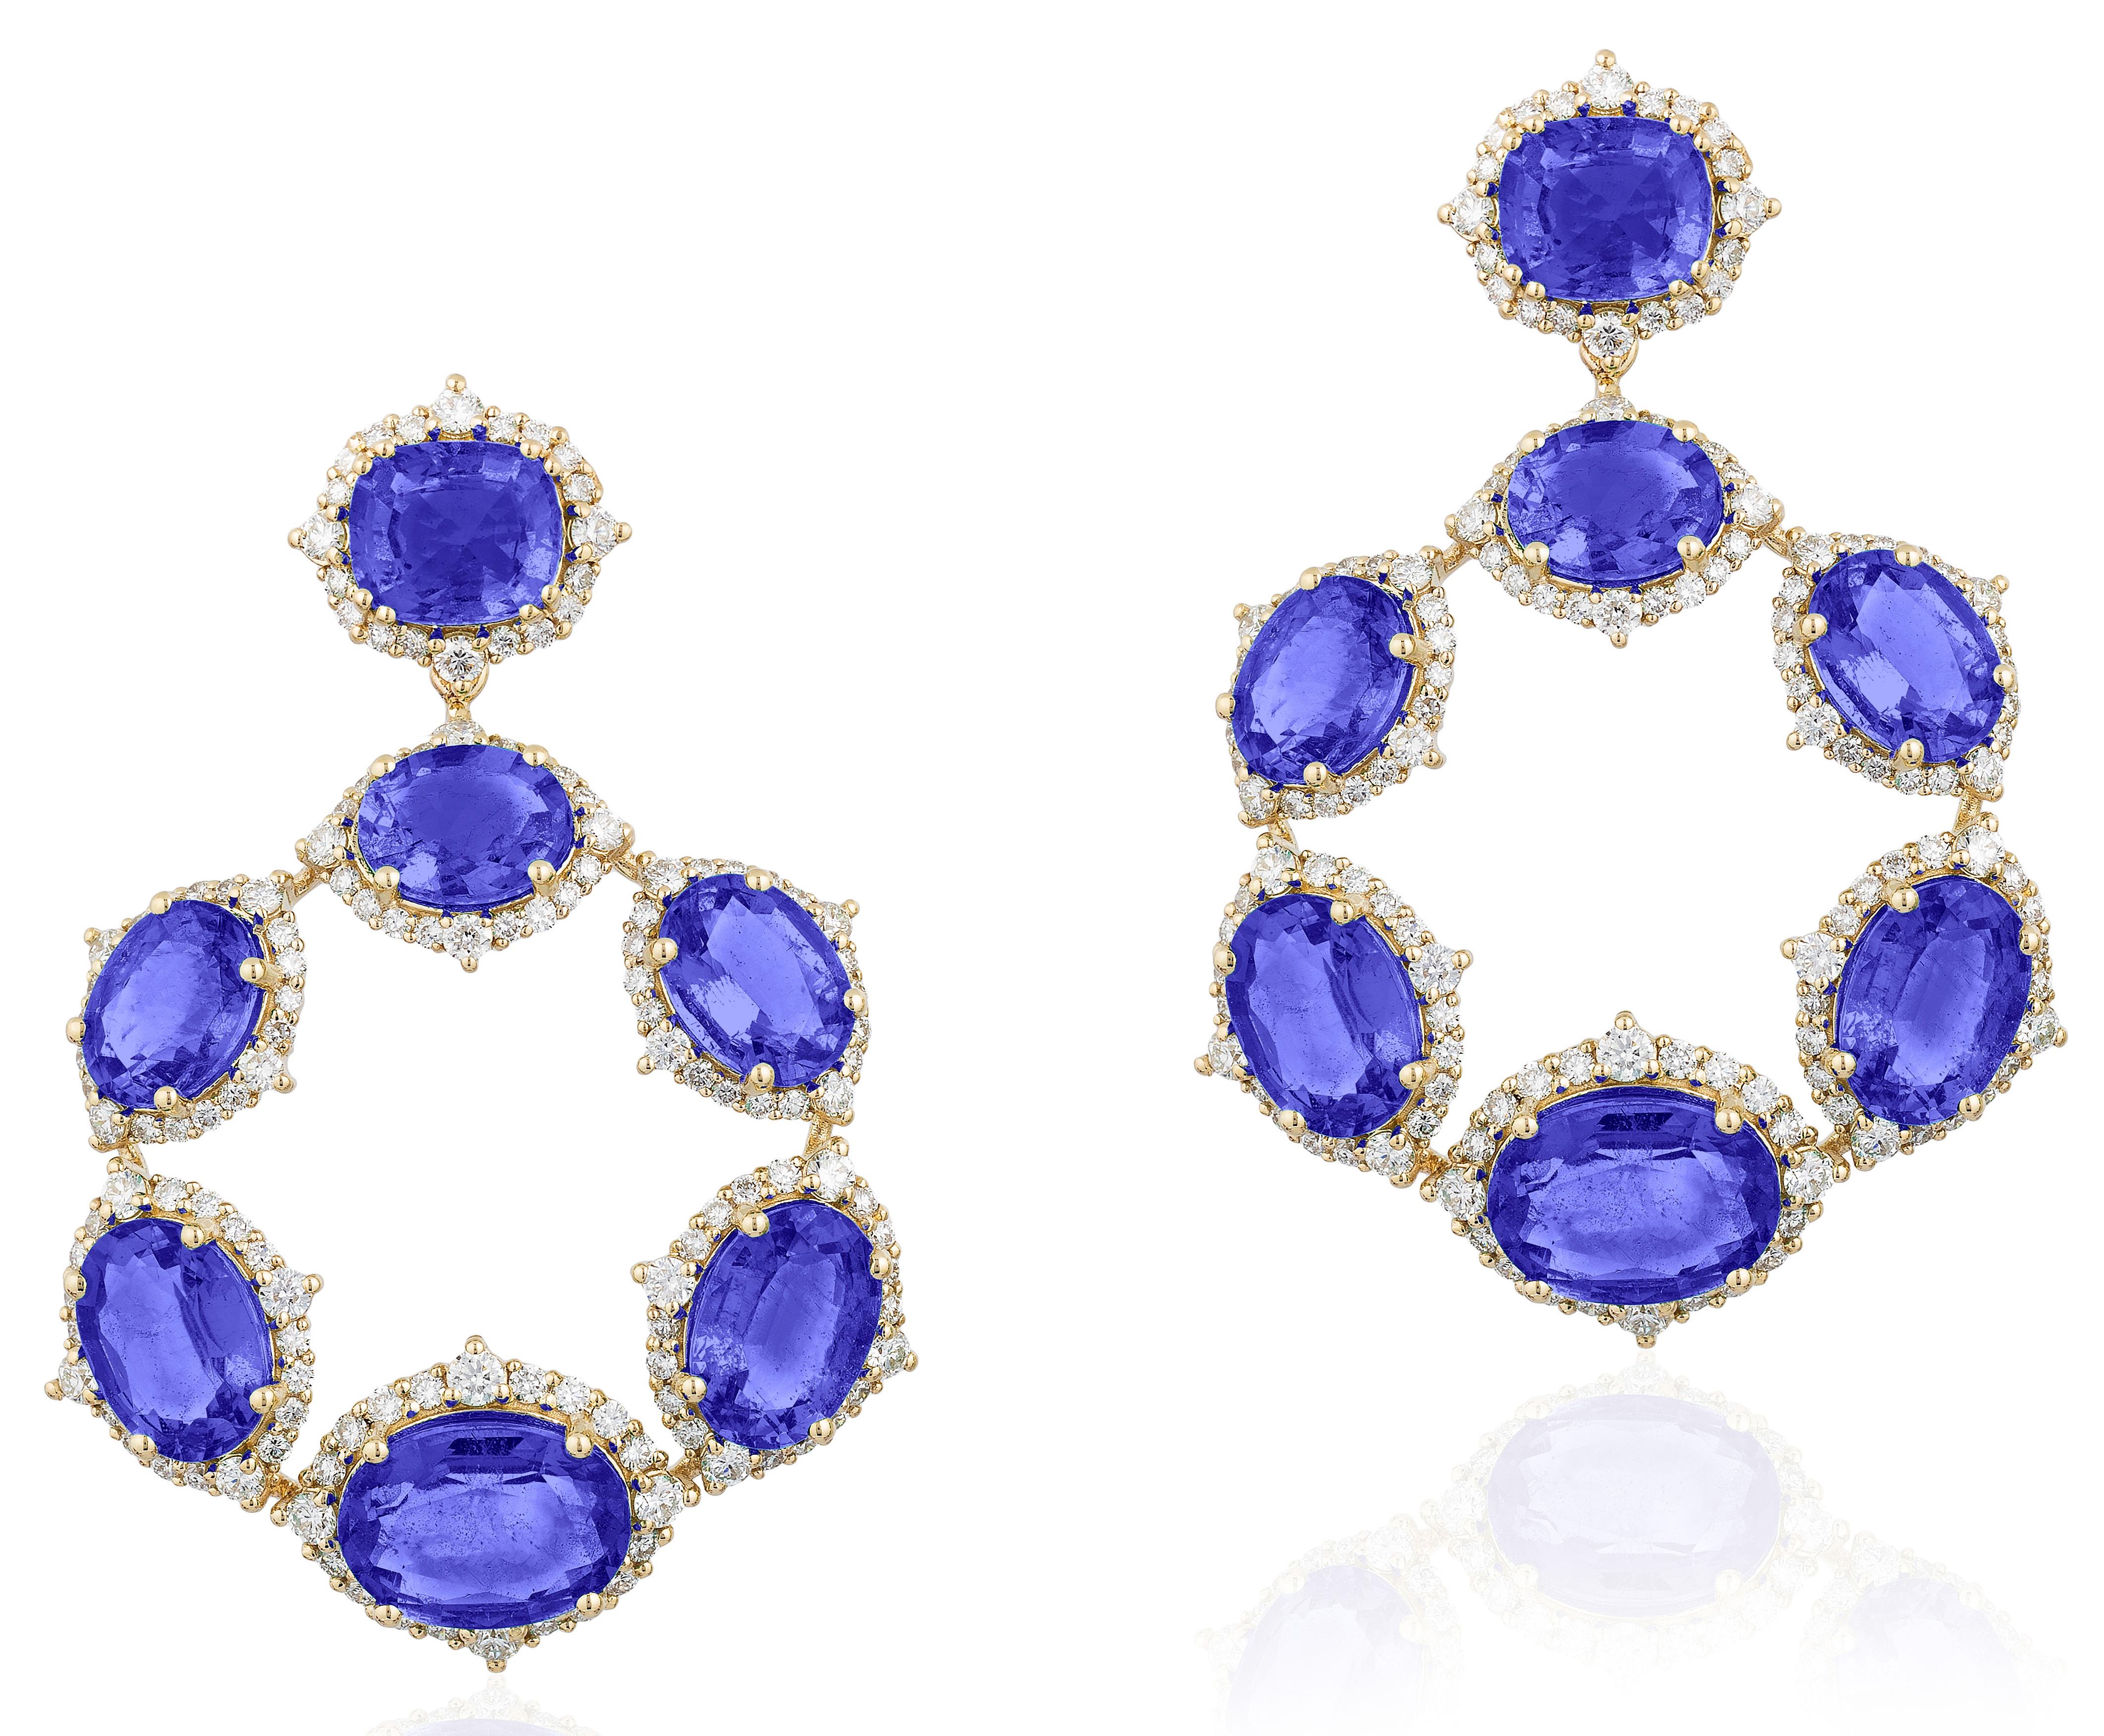 Oval Tanzanite Hoop Earring with Diamonds in 18K Yellow Gold, from 'G-One' Collection

Gemstone Weight: Tanzanite- 14.29 Carats. 

Diamond: G- H/ VS, Approx Wt- 2.16 Carats